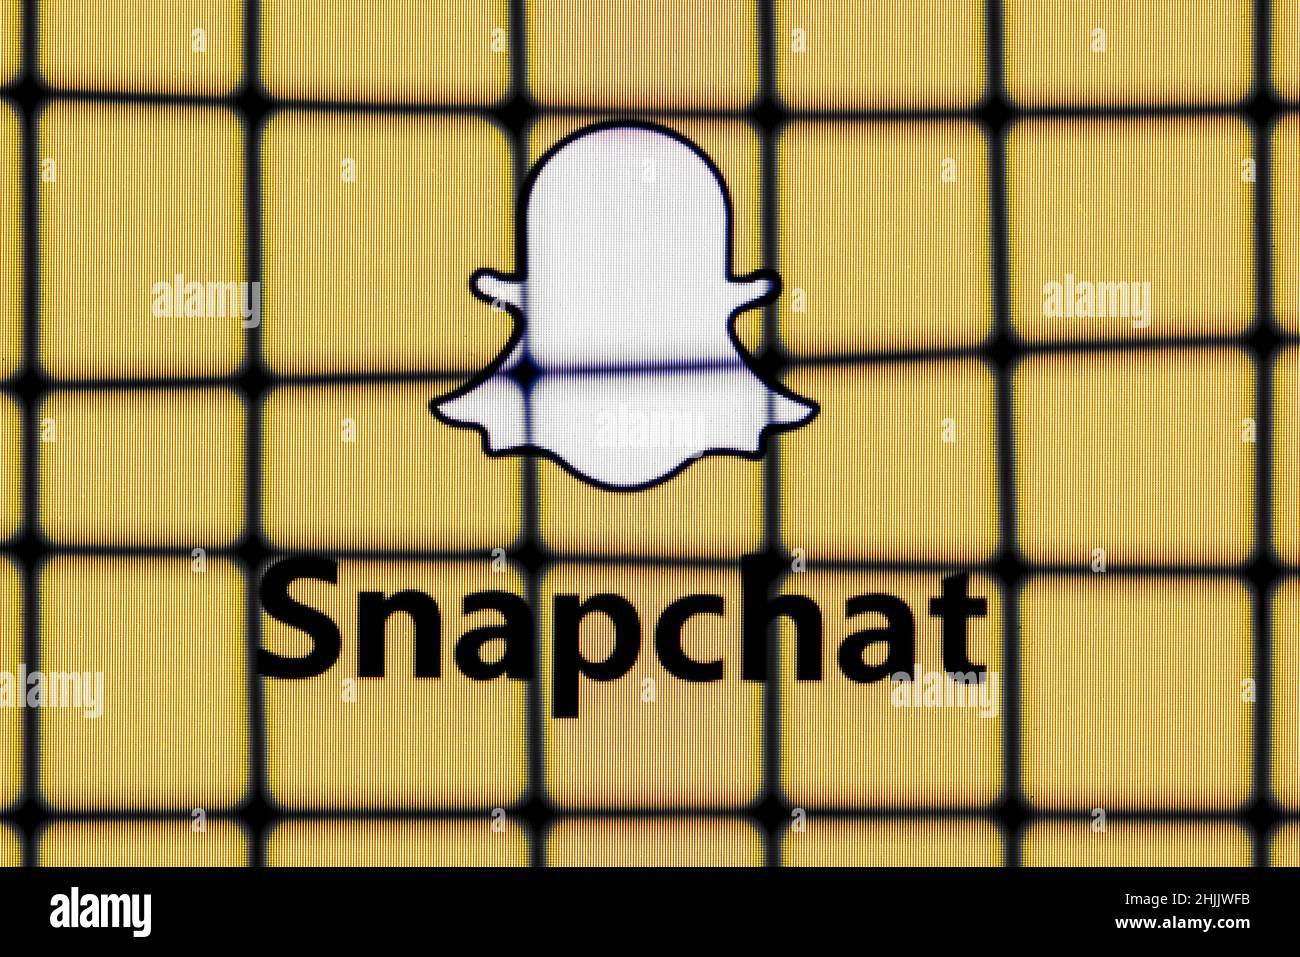 The logo of the Snapchat instant messaging service behind bars. The concept of Snapchat censorship and prohibition. Stock Photo